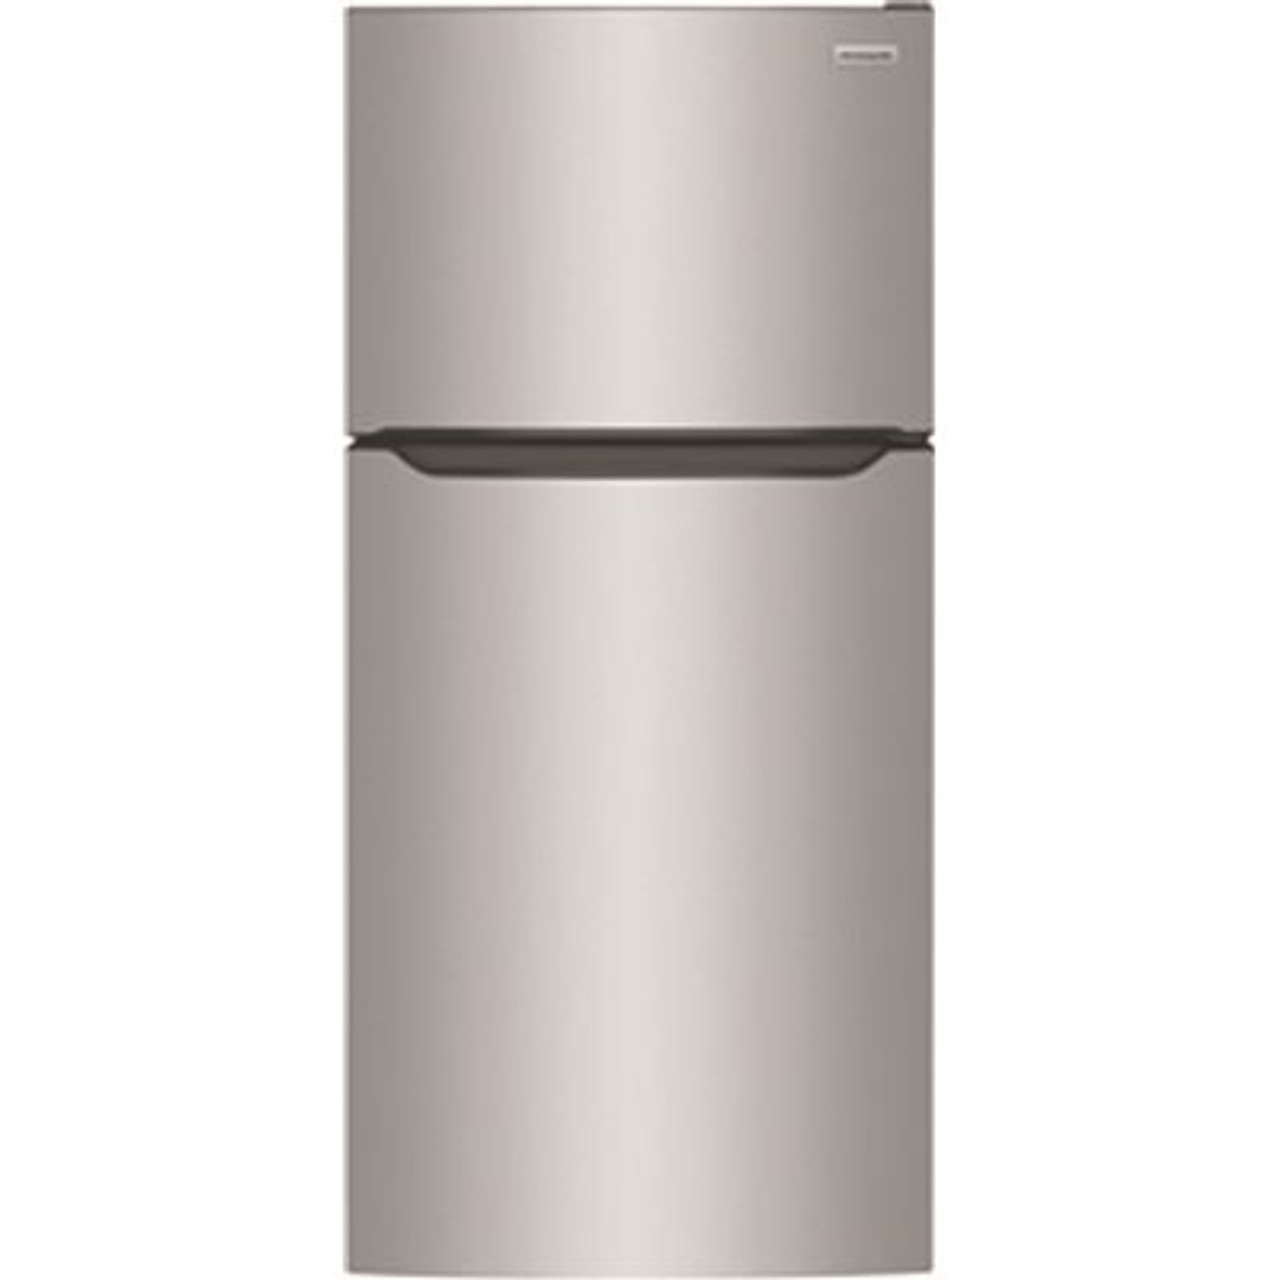 Frigidaire 30 Inch 20.0 Cu. Ft. Top Freezer Energy Star Refrigerator In Stainless Steel